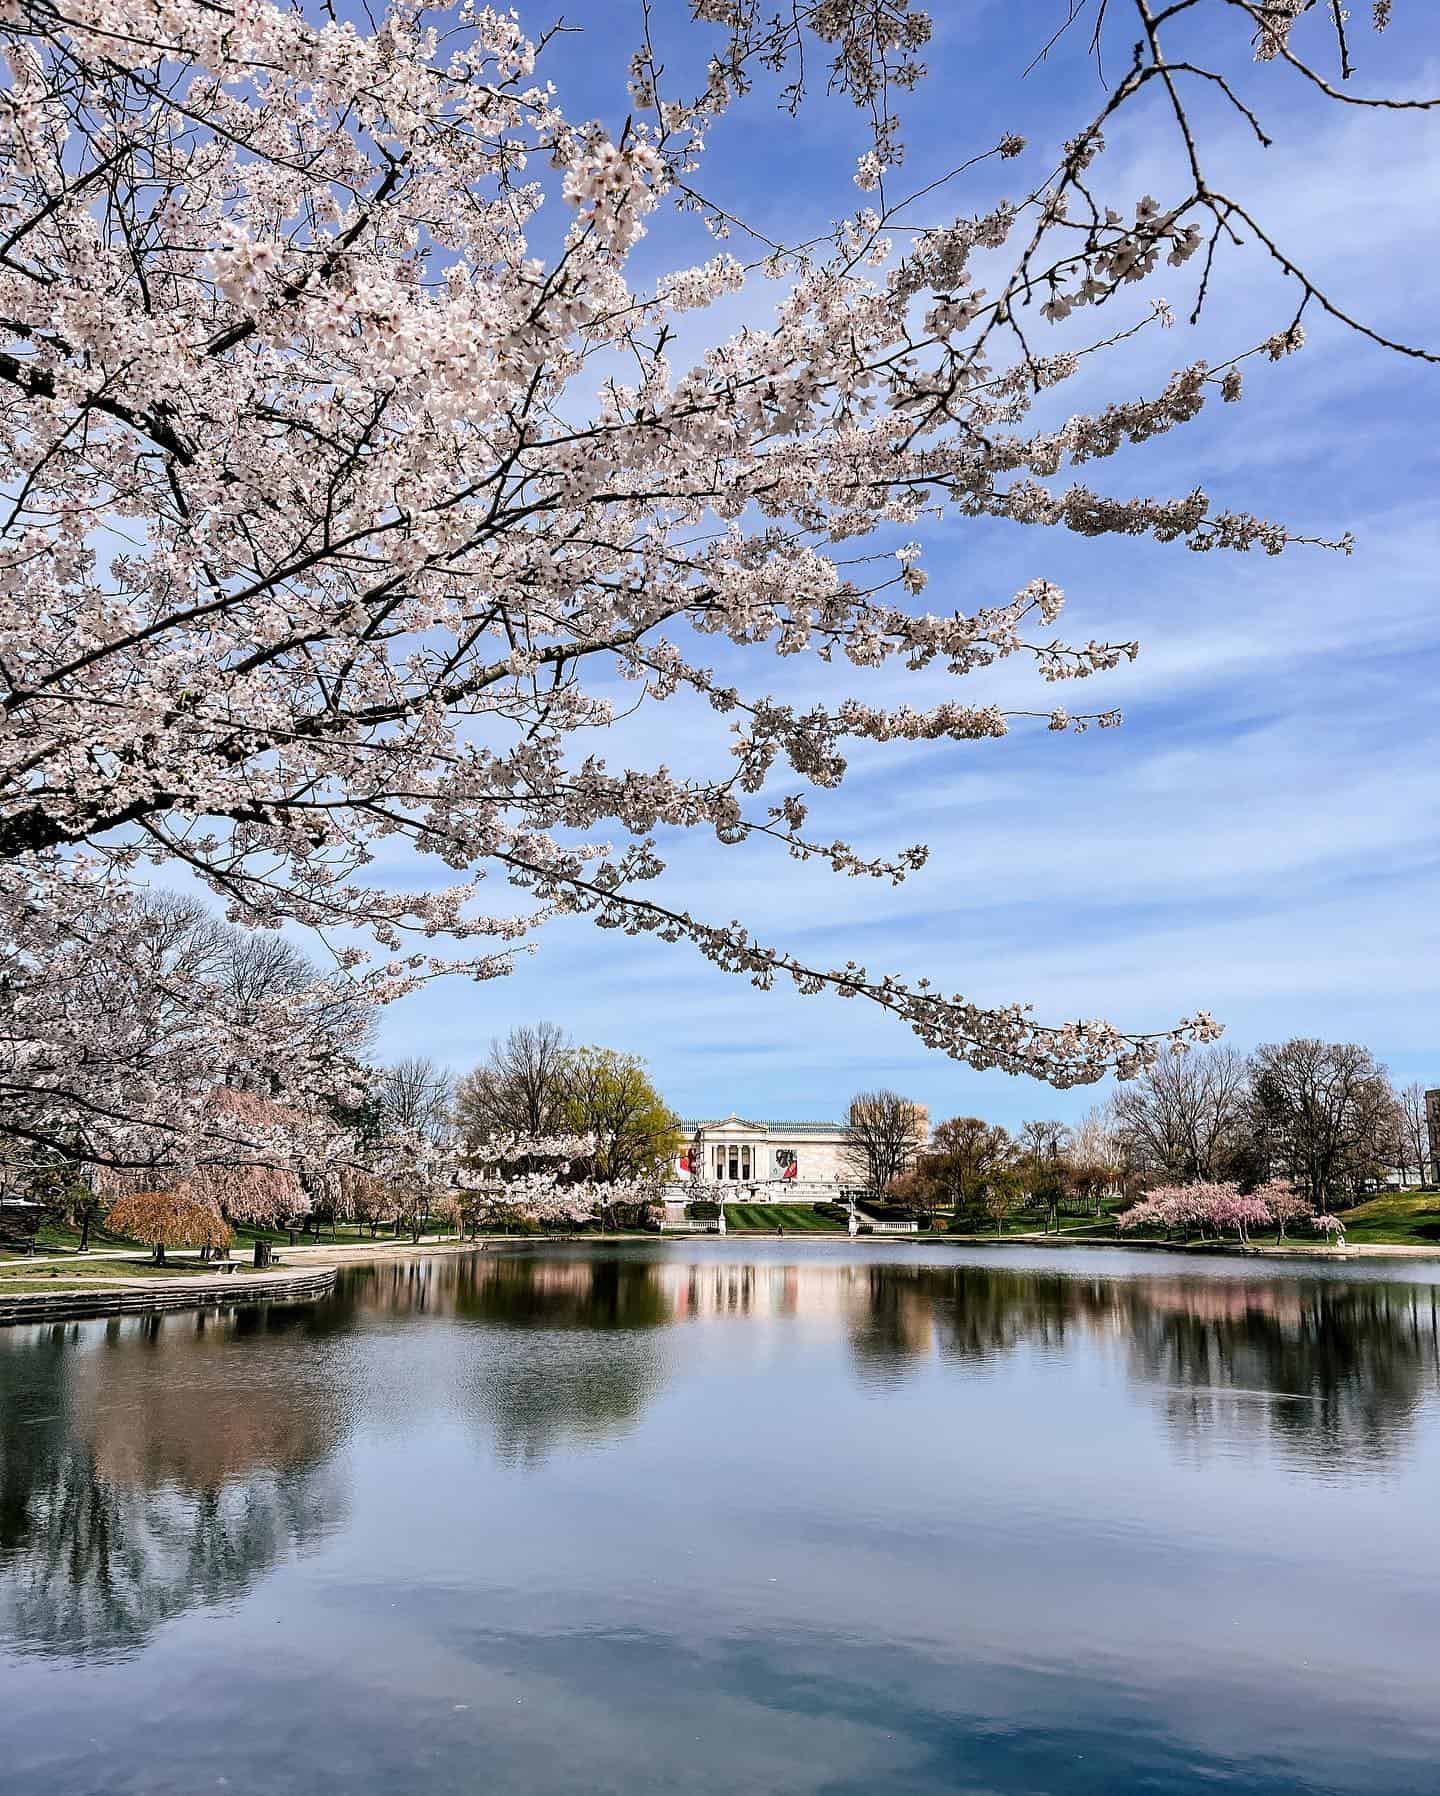 Spring blooms at Wade Lagoon + SUNSHINE IN CLE = the perfect morning! 🌸✨ #clevelandvibes 
#thisiscle #ohiofindithere #clevelandmuseumofart #wadelagoon #springinohio #cheryblossom #ohiofindithere #laurellovescle #cleveland #ohio